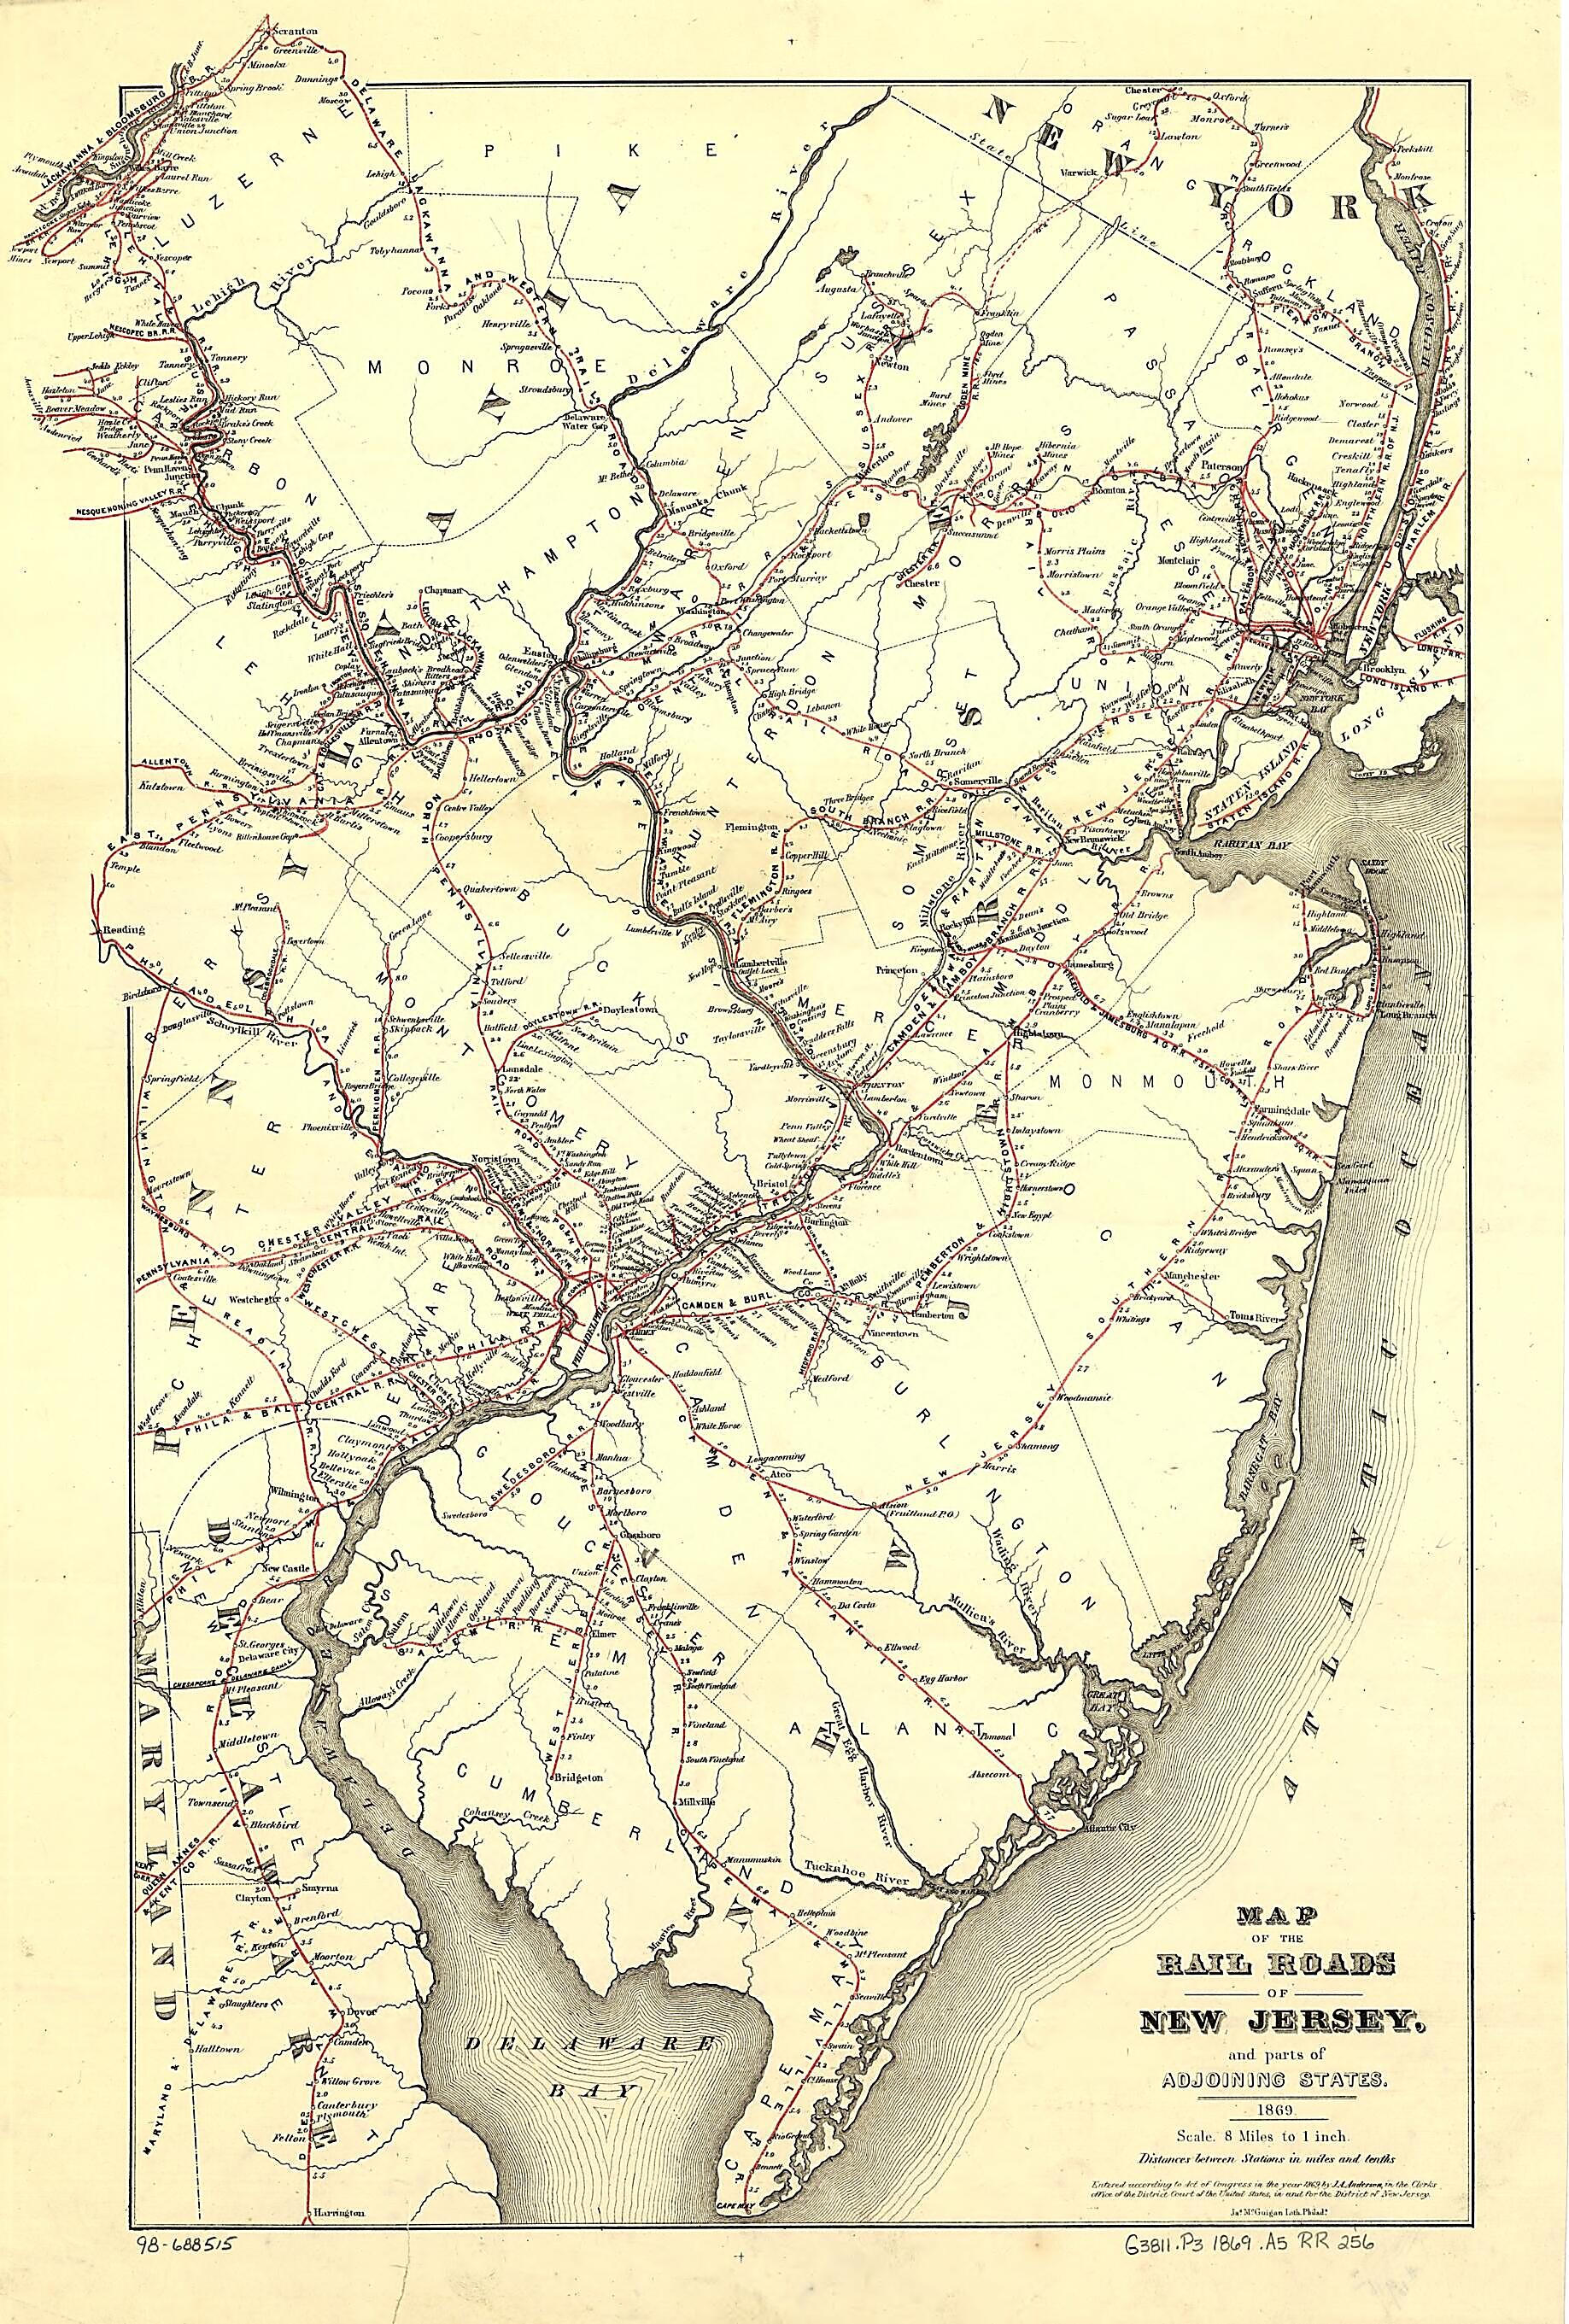 This old map of Map of the Rail Roads of New Jersey, and Parts of Adjoining States from 1869 was created by J. A. Anderson in 1869